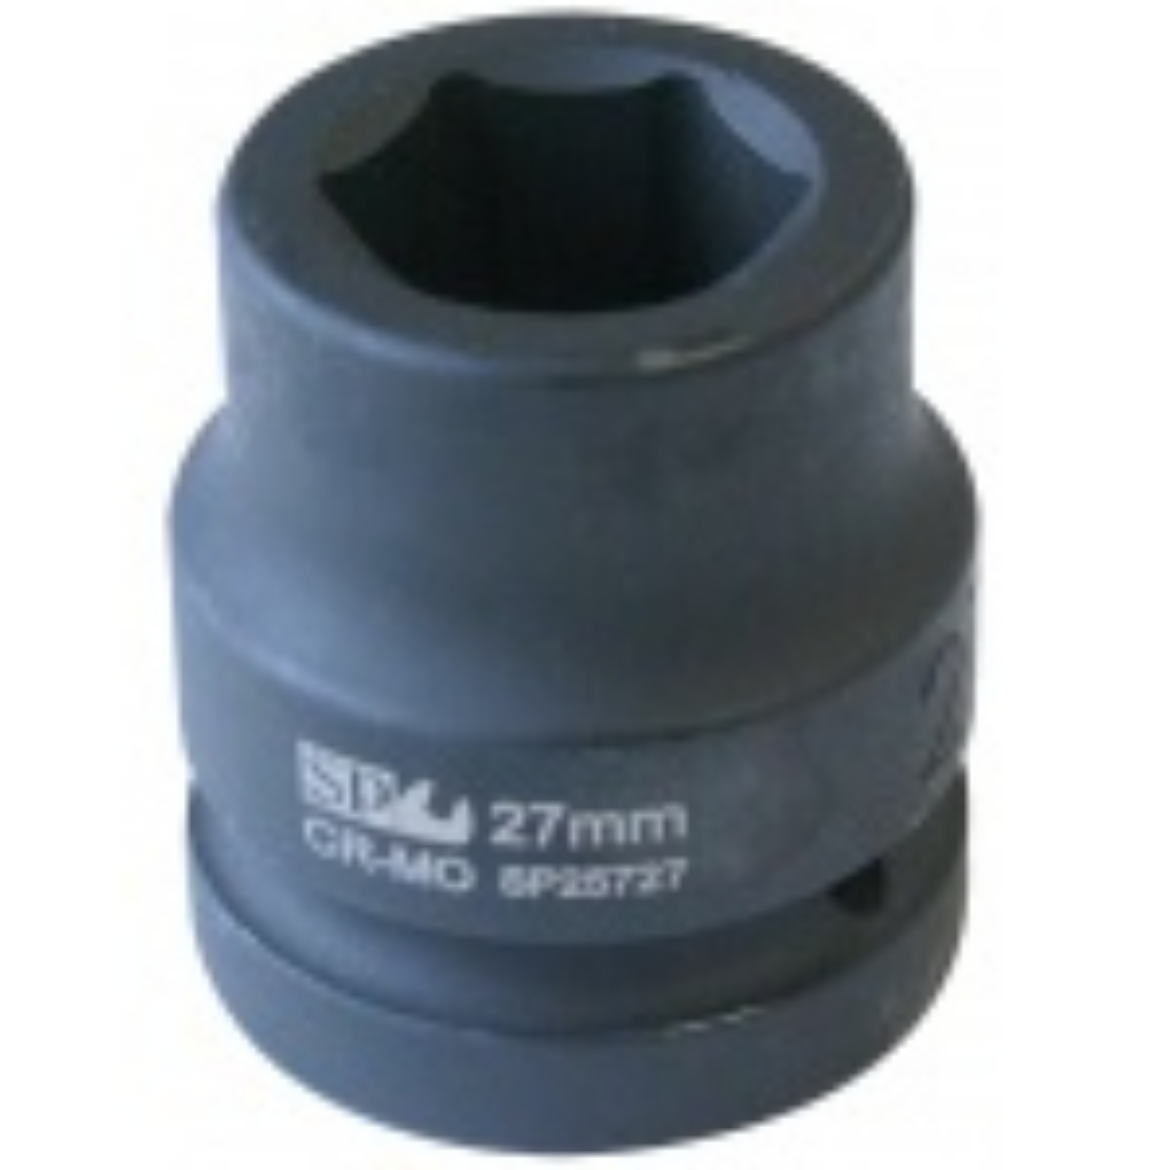 Picture of SOCKET IMPACT 1"DR 6PT METRIC 56MM SP TOOLS